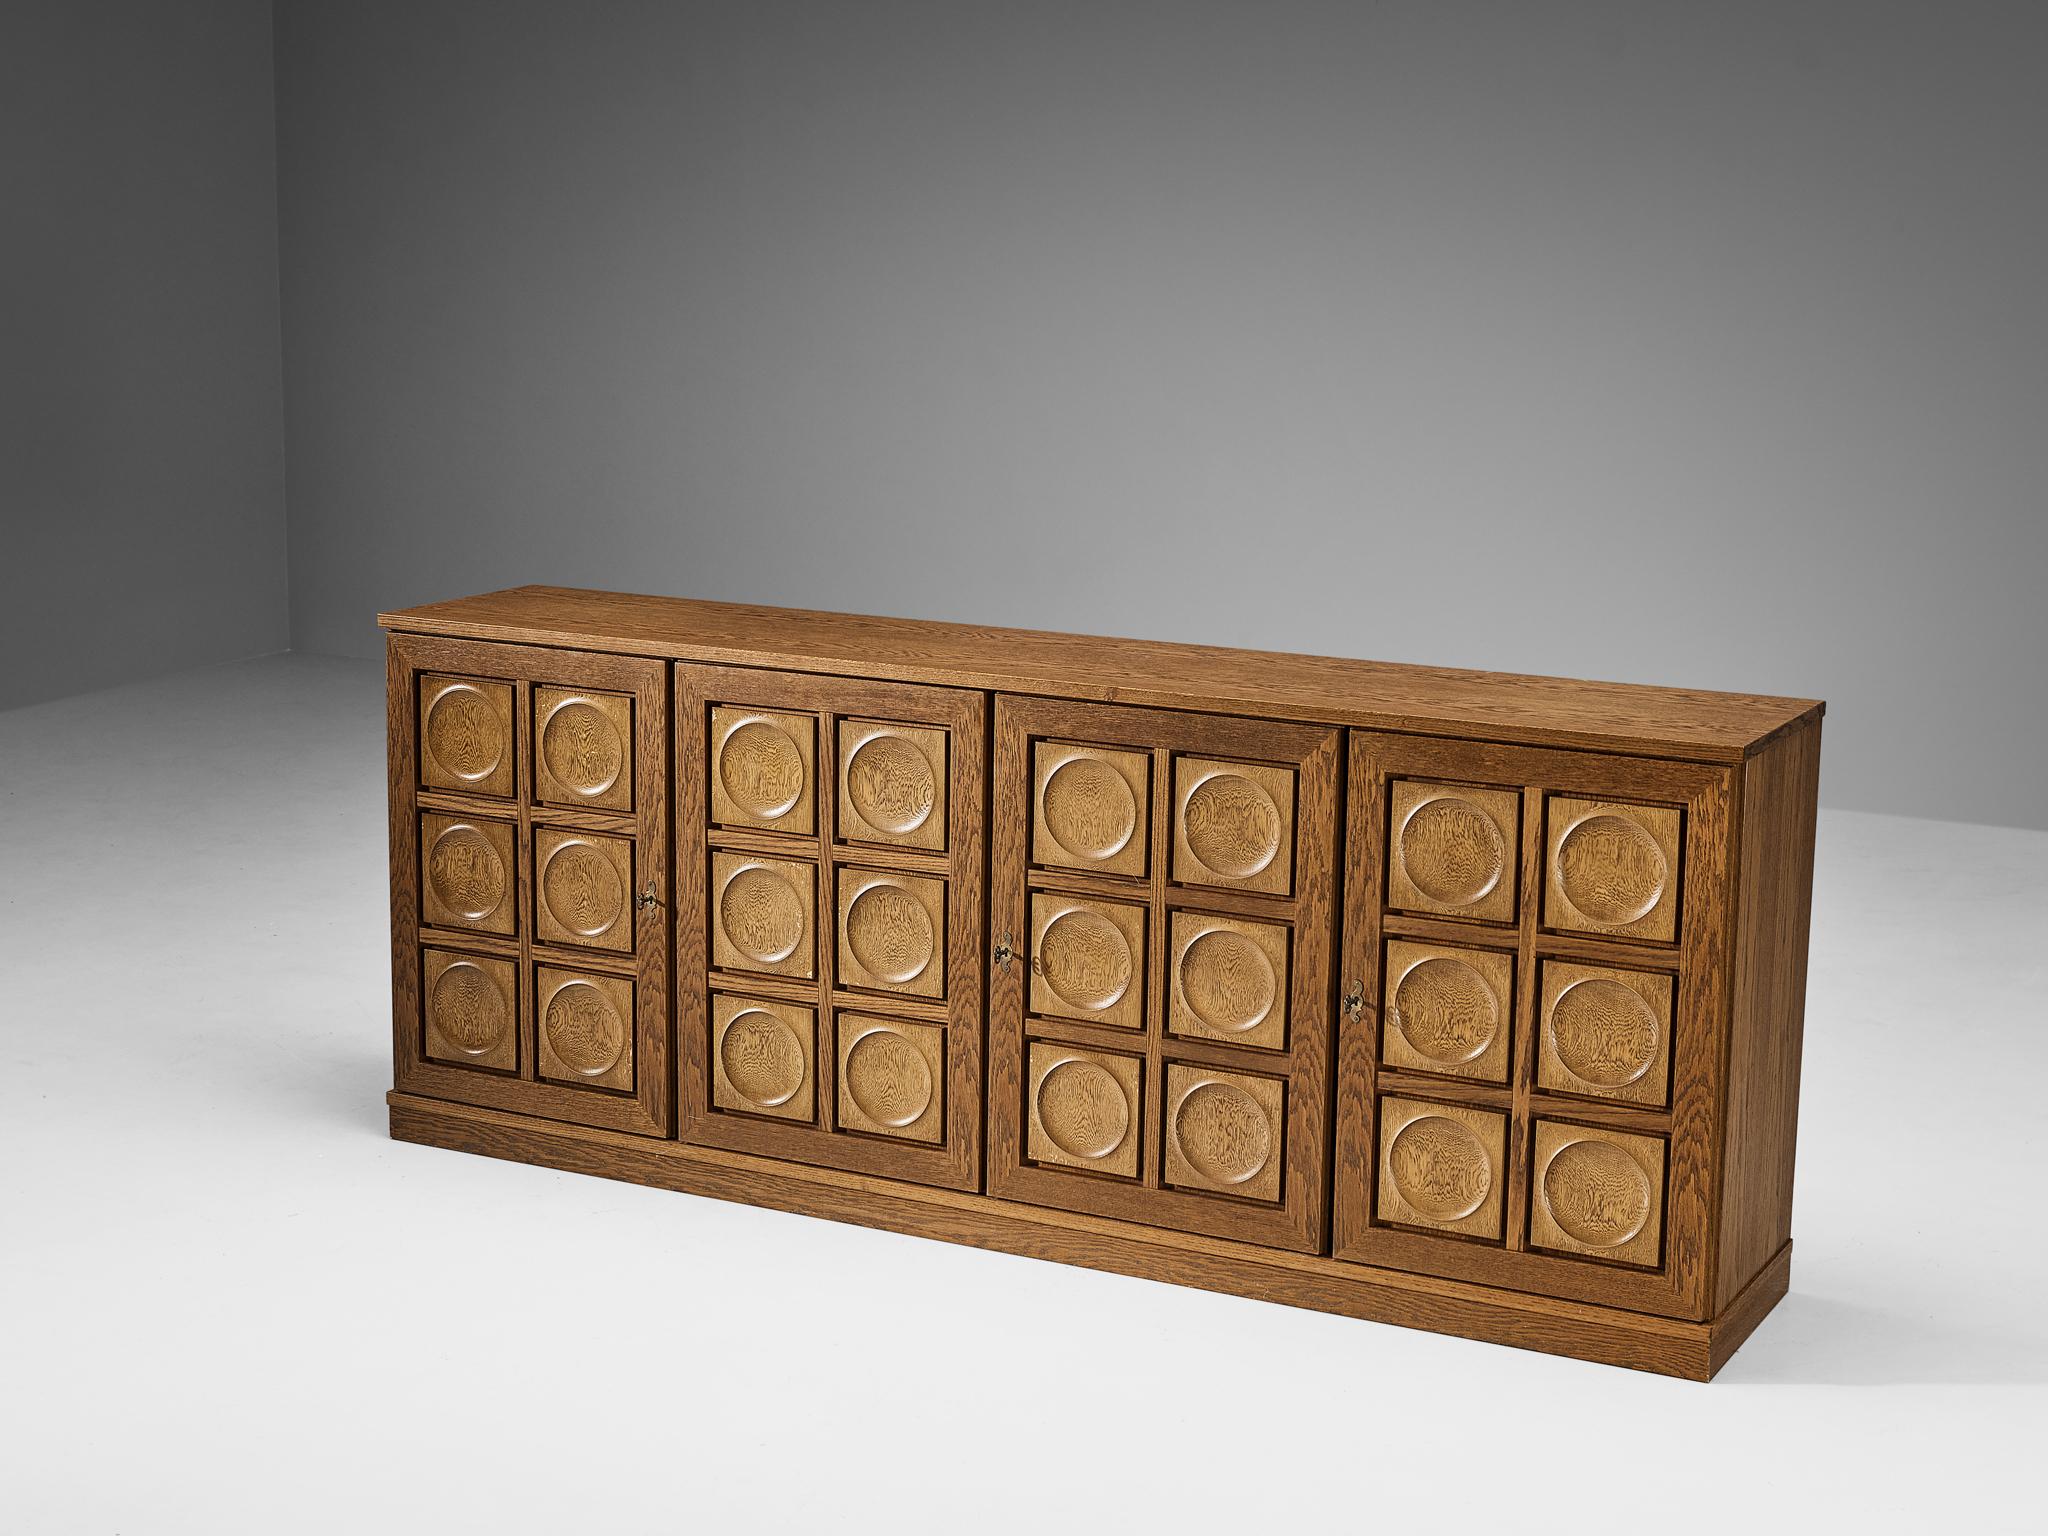 Sideboard or credenza, oak, brass, plastic, felt, Belgium, 1970s.

This cabinet features a clear rhythm and flow established by means of a well-thought-out lay out that is utterly well-balanced. The carved circles immediately catch the eye and are